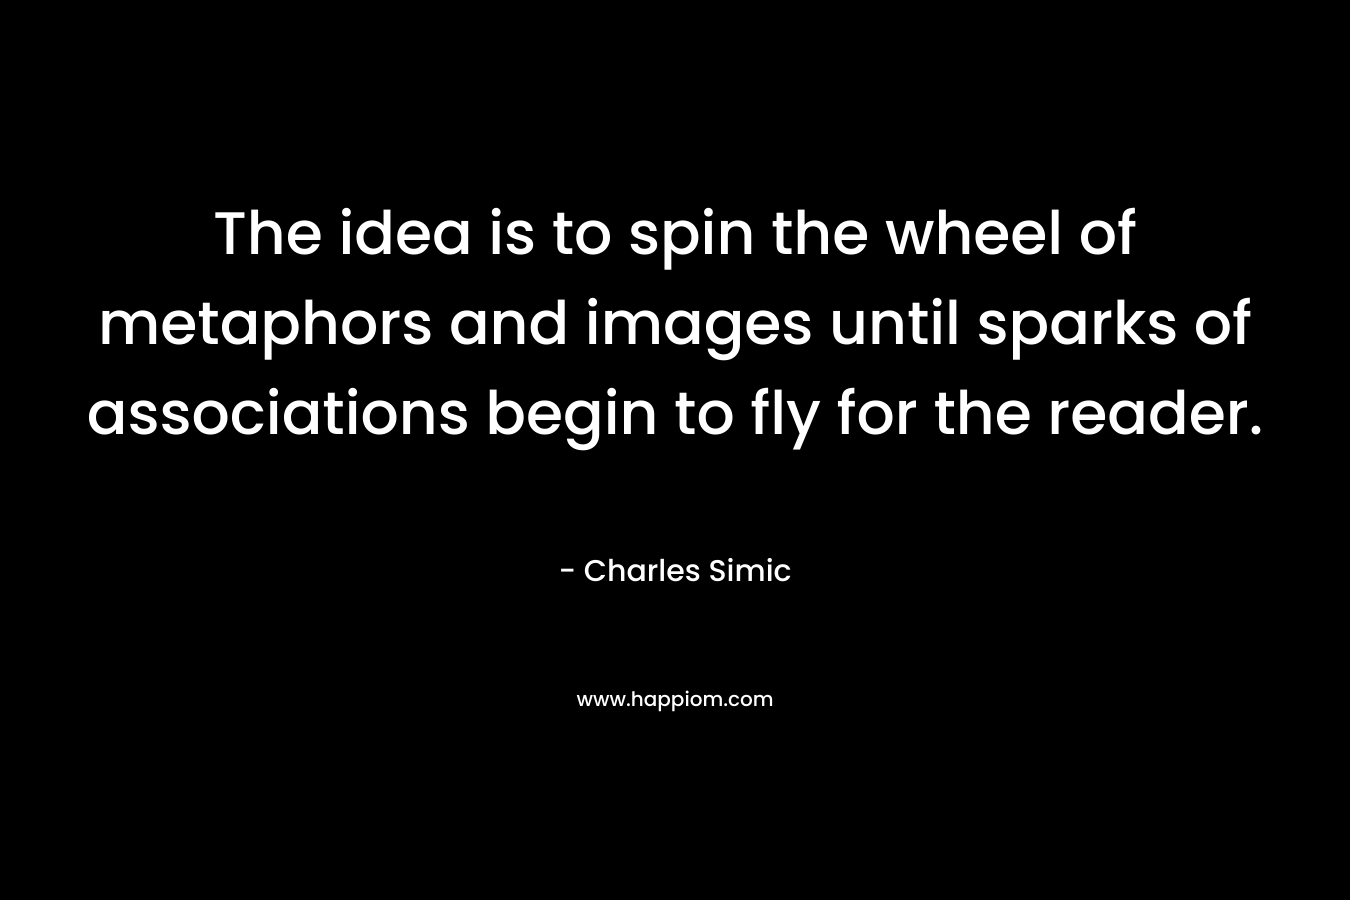 The idea is to spin the wheel of metaphors and images until sparks of associations begin to fly for the reader. – Charles Simic